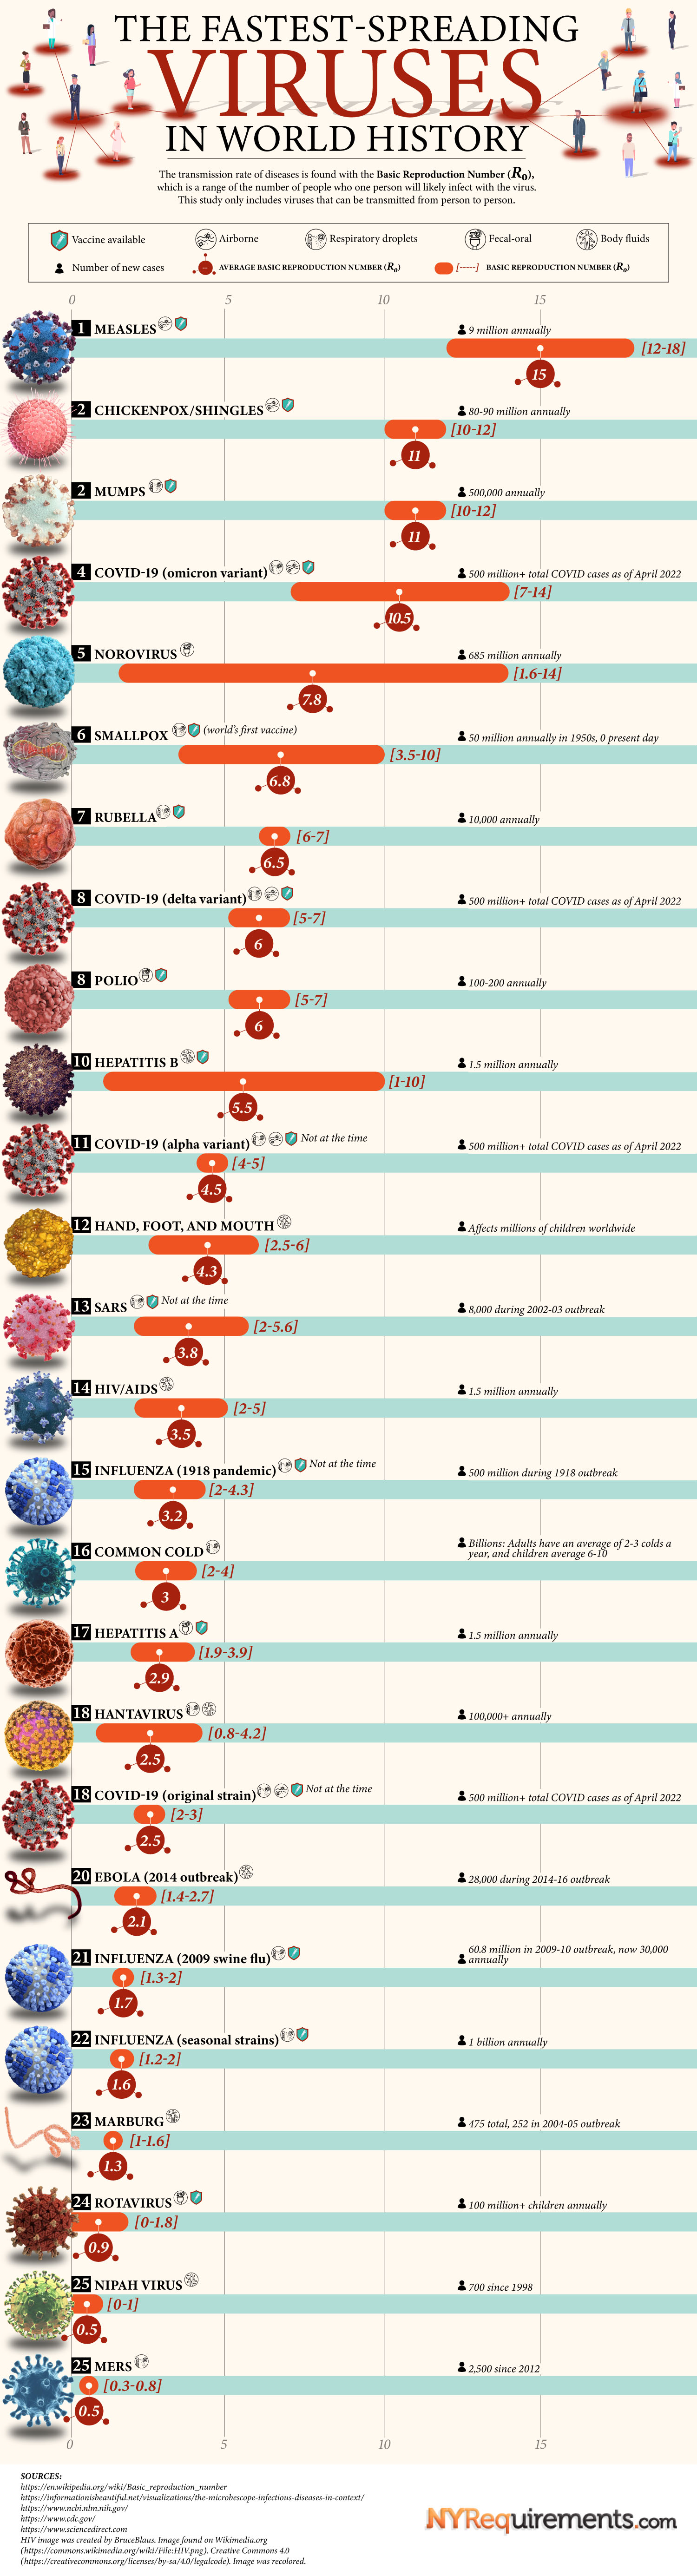 The Fastest-Spreading Viruses in World History